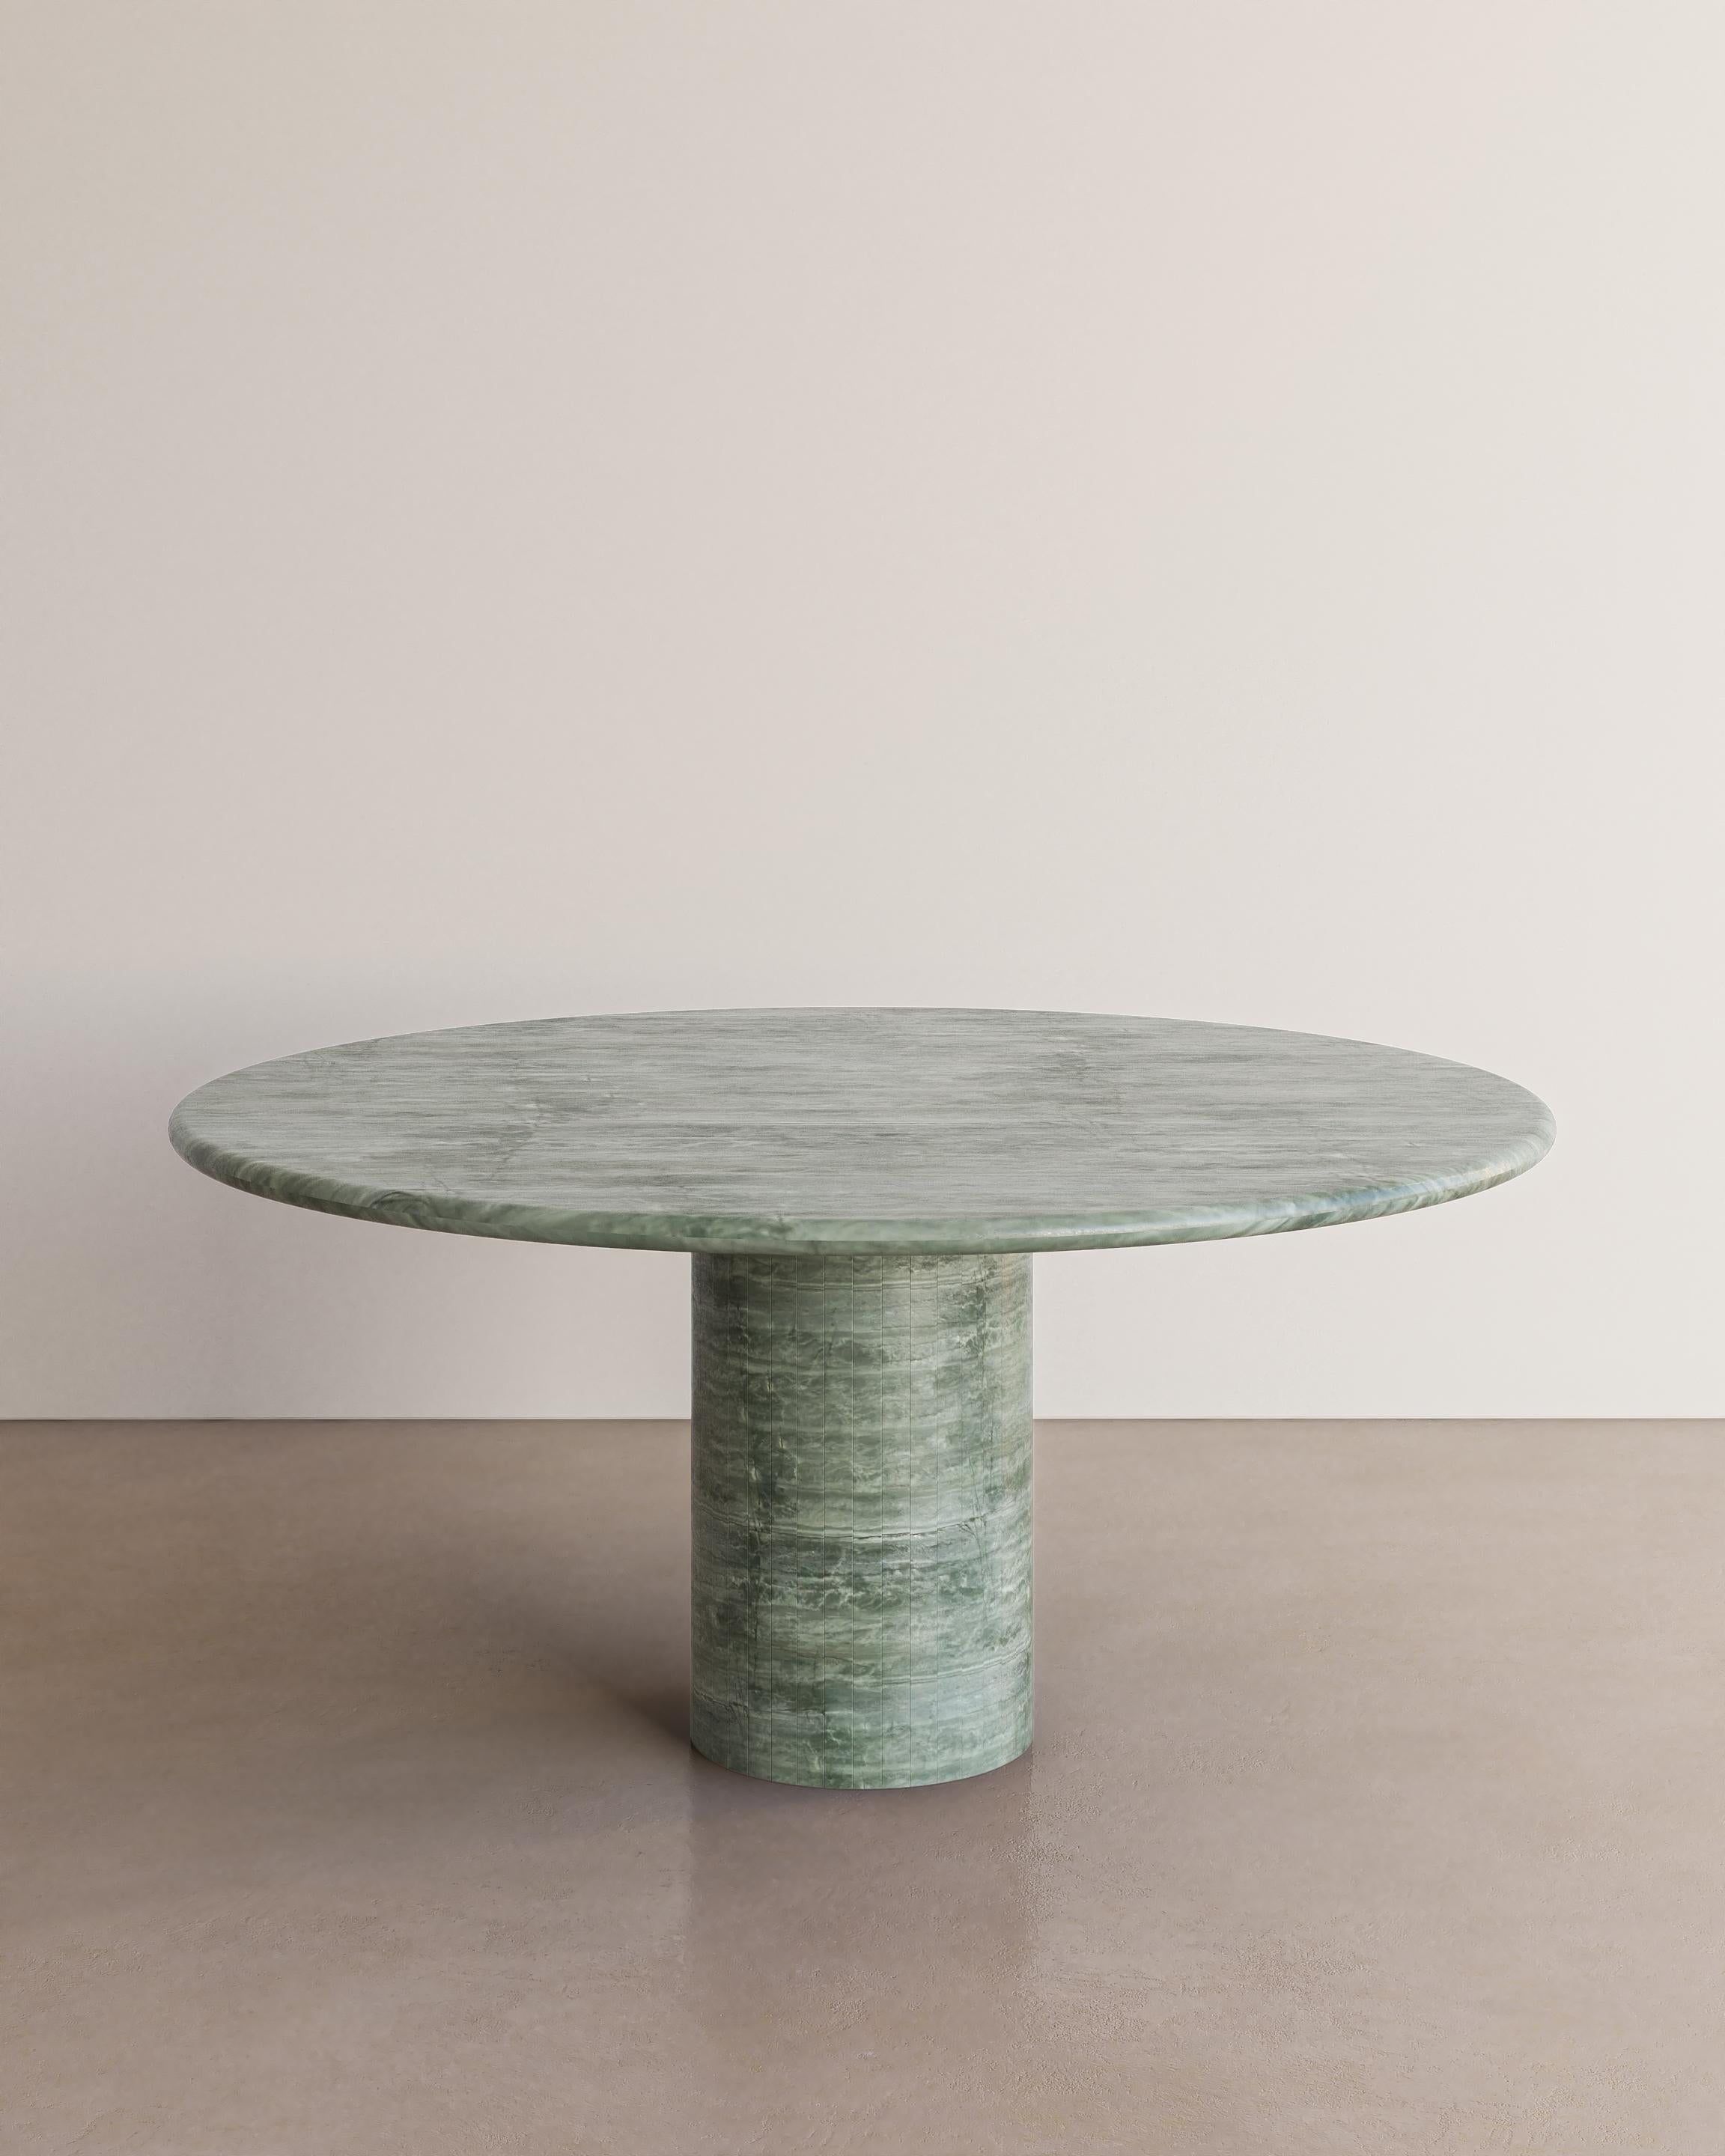 The Voyage Dining Table I in Esmeralda Quartzite sourced in brazil with a polished finish  by The Essentialist celebrates the simple pleasures that define life and replenish the soul through harnessing essential form. Envisioned as an ode to